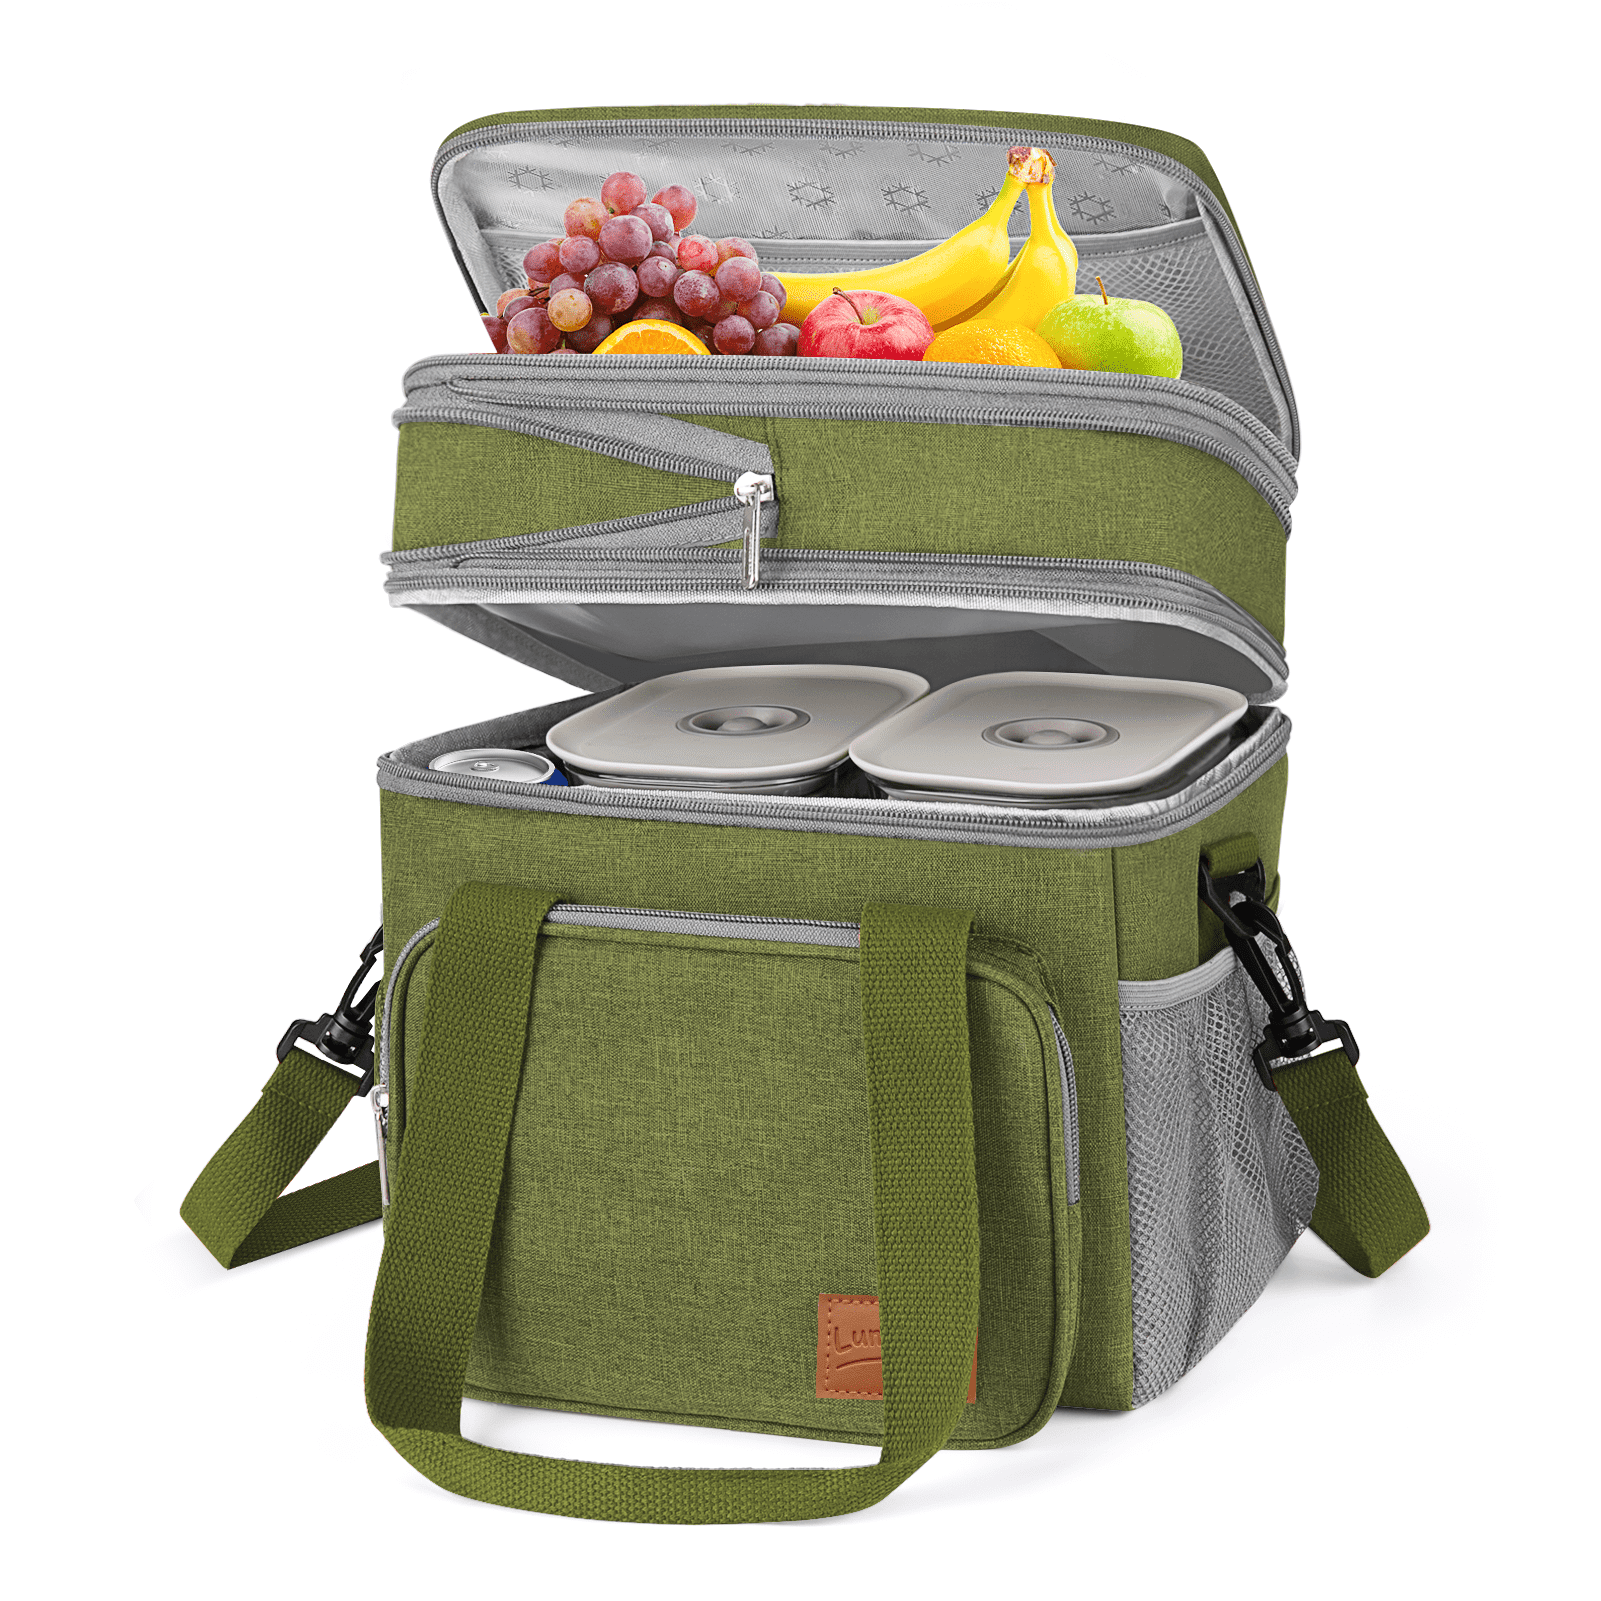 Mecrowd Lunch Bag for Women Men Cooler Bag Double Deck Lunch Box, Leakproof  Insulated Soft Large Lun…See more Mecrowd Lunch Bag for Women Men Cooler